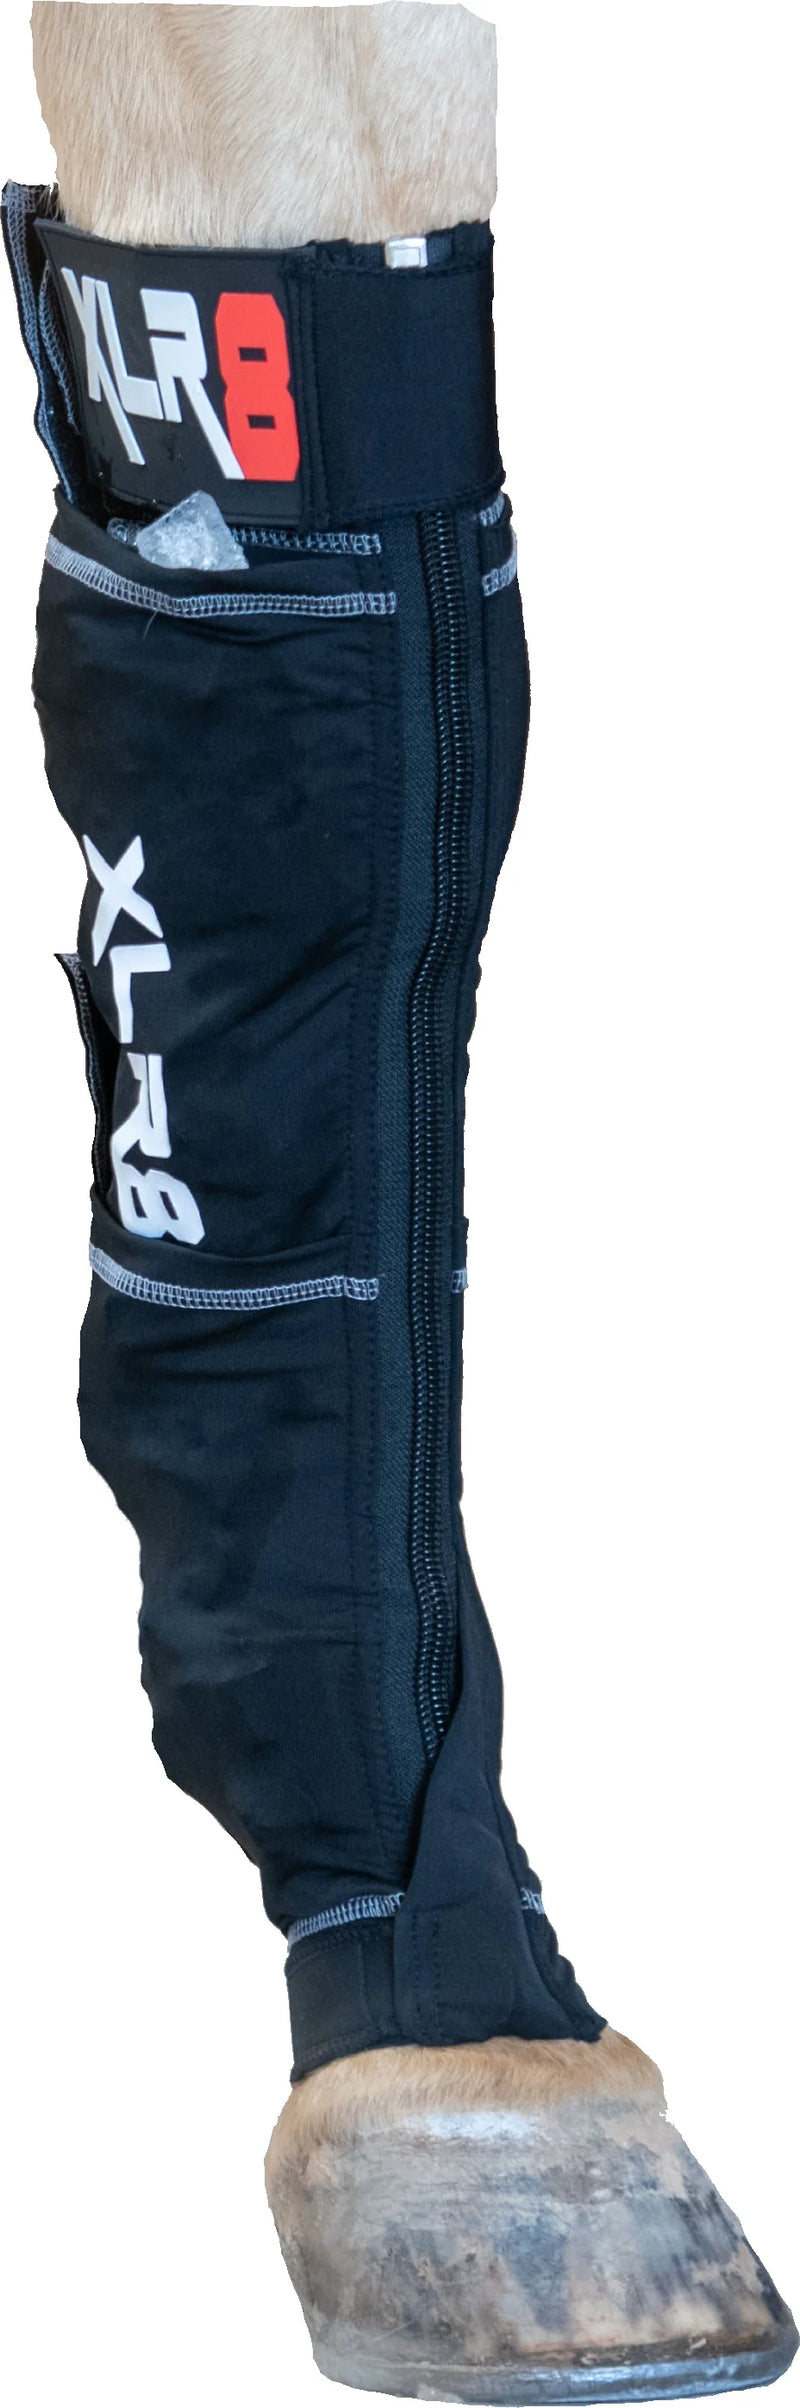 XLR8 FRONT Cryo Ice Boots